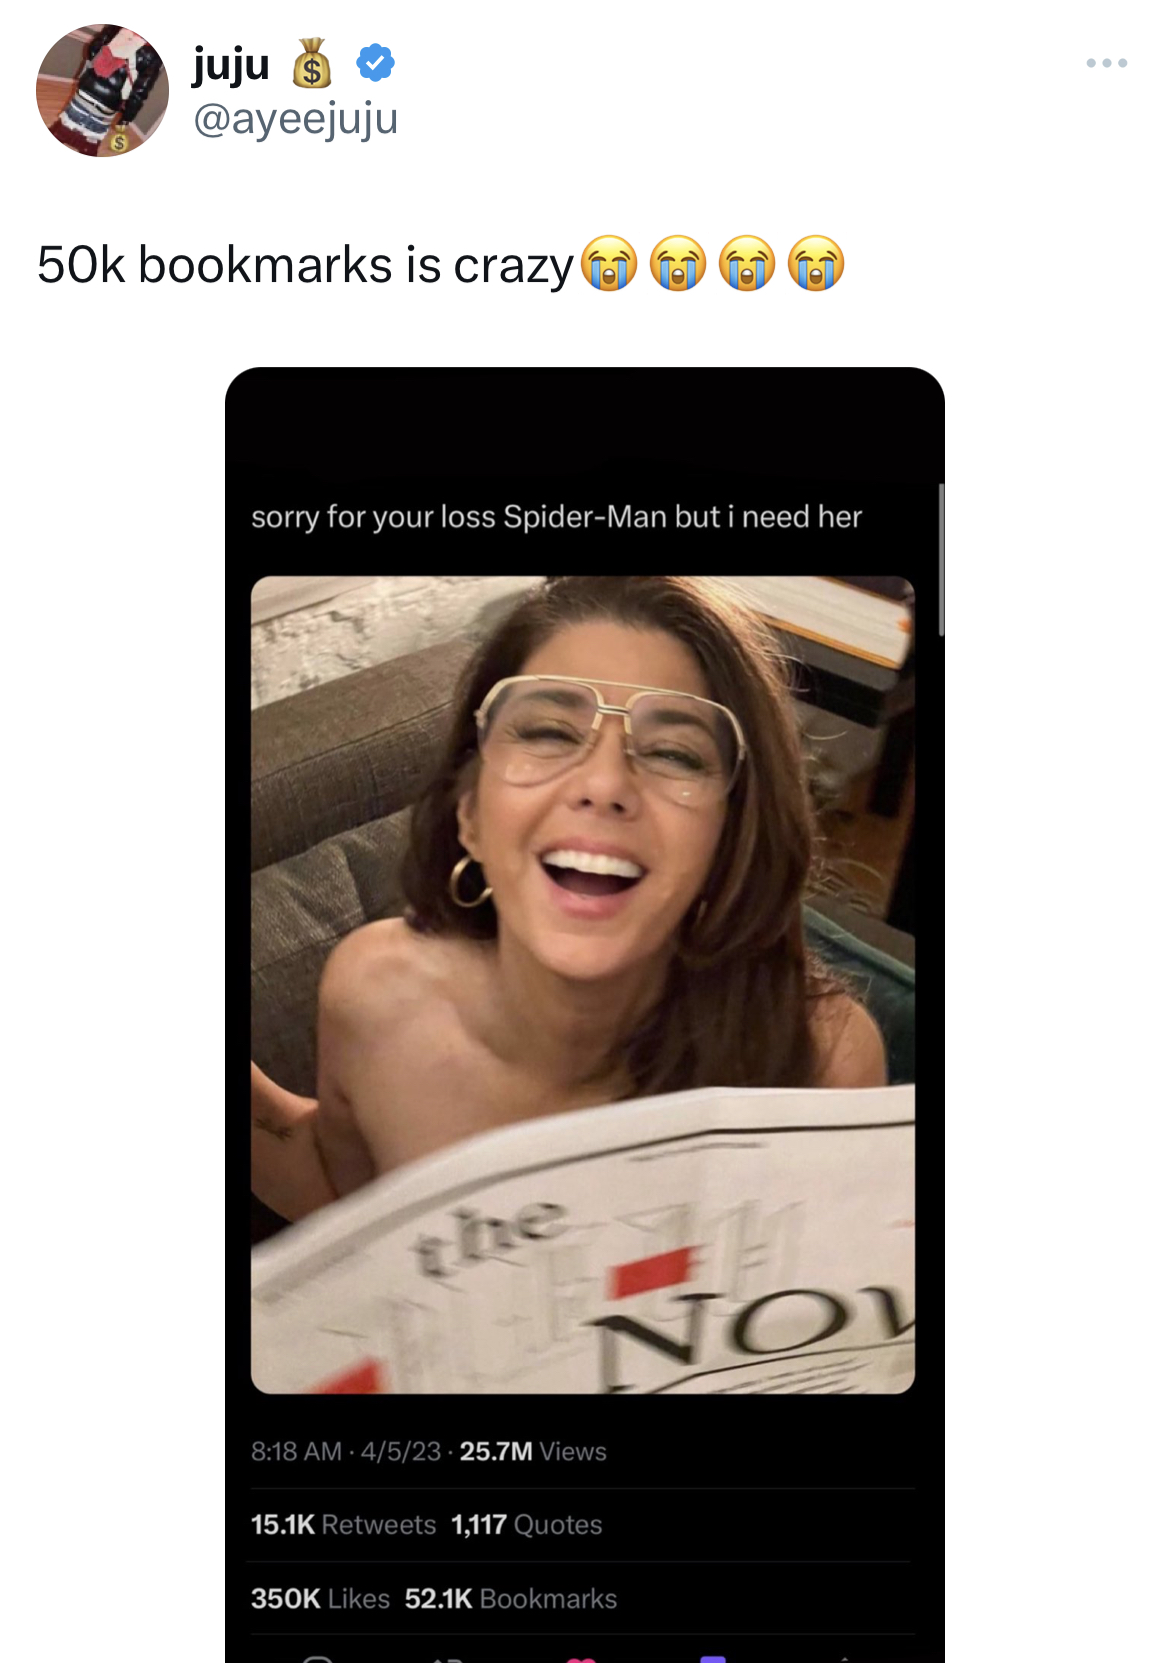 savage and salty tweets - website - juju 50k bookmarks is crazy sorry for your loss SpiderMan but i need her 452325.7M Views 1,117 Quotes Bookmarks